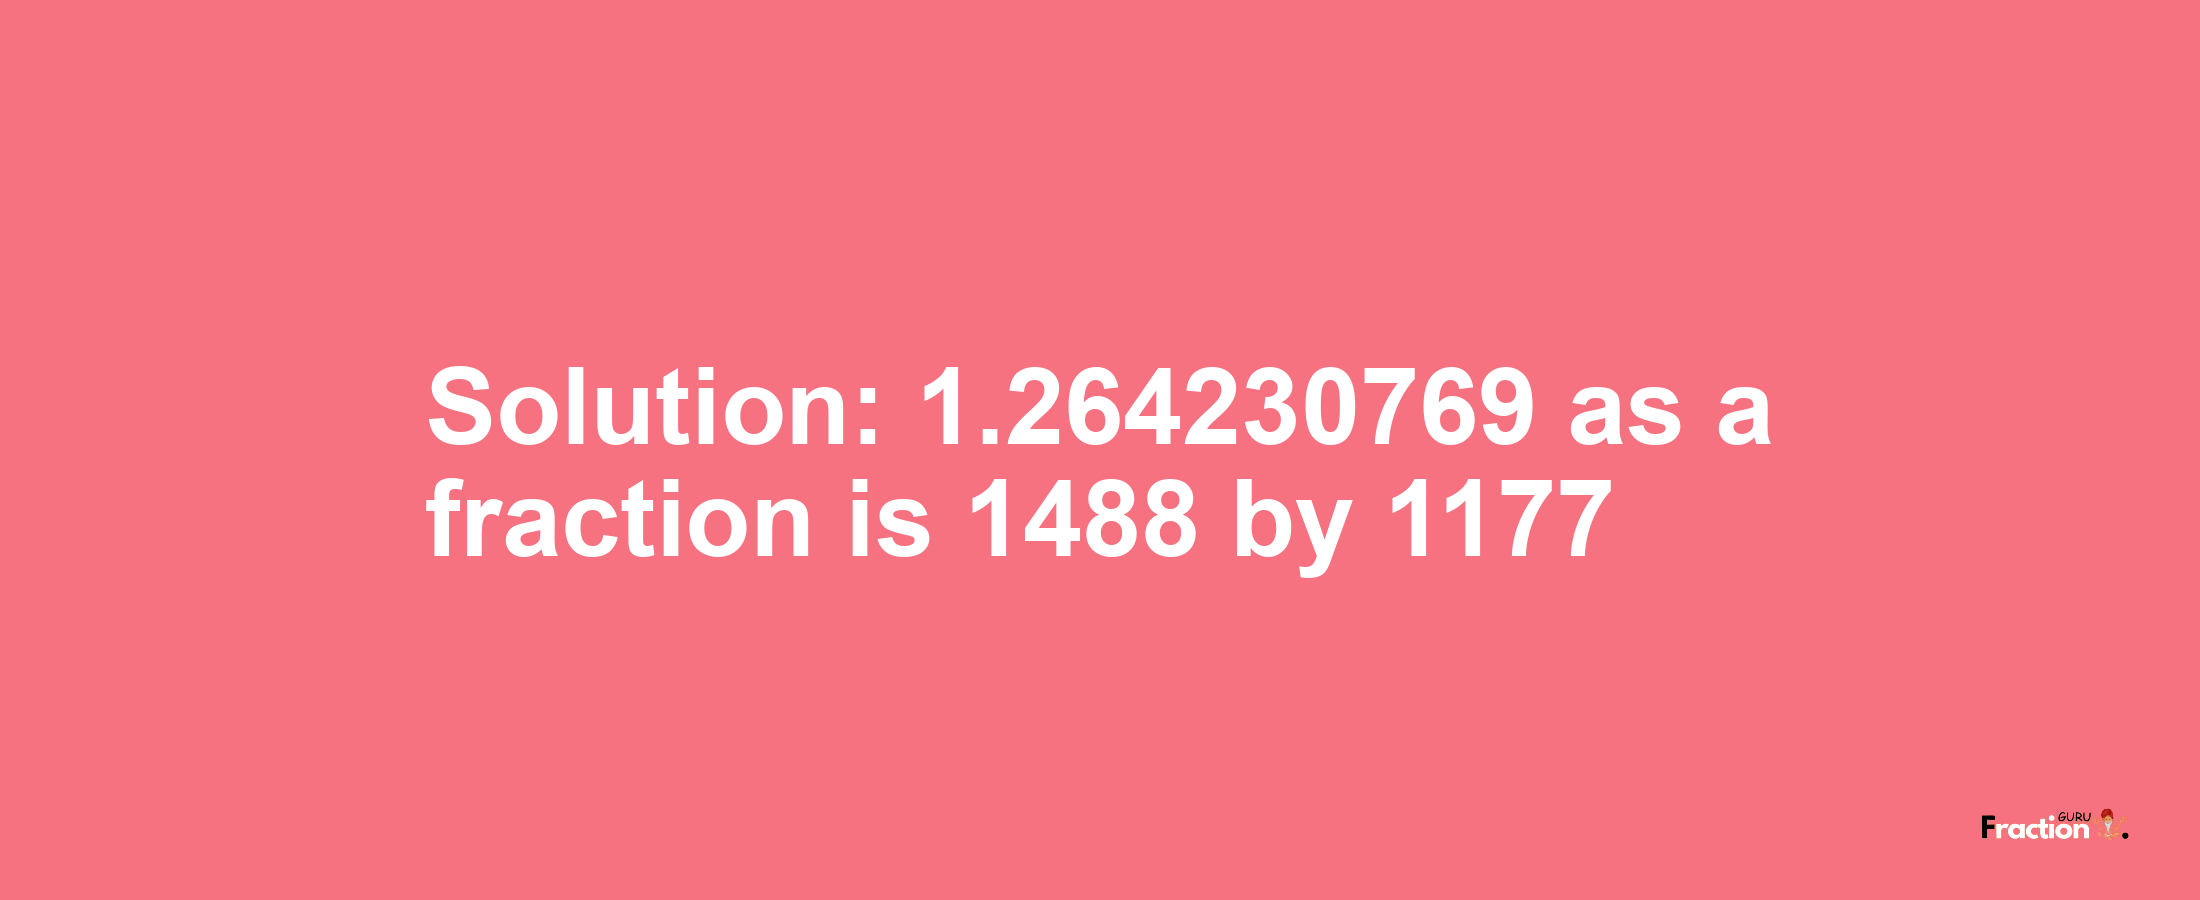 Solution:1.264230769 as a fraction is 1488/1177